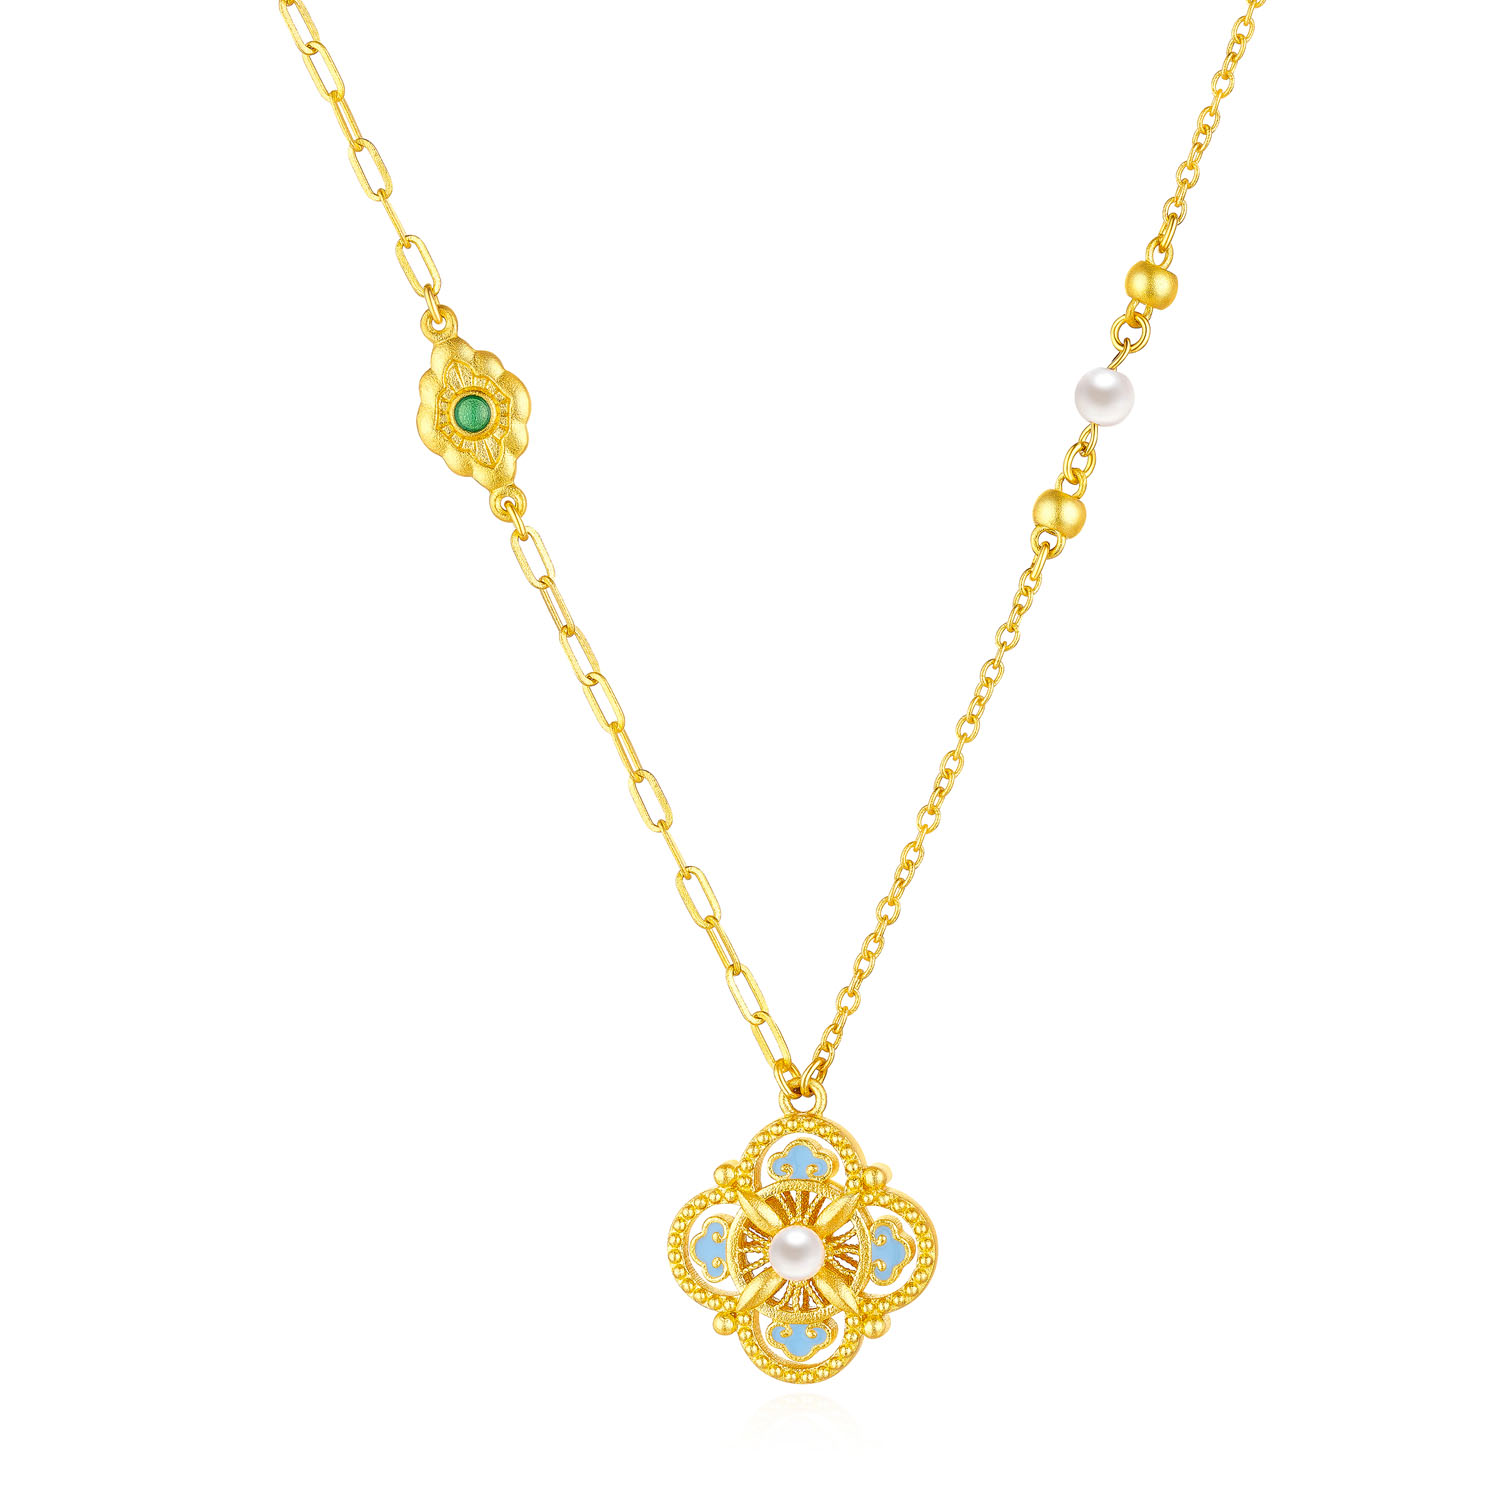 Heirloom Fortune - Charm of Song Dynasty Collection "Auspicious Song Style" Gold Pearl Necklace